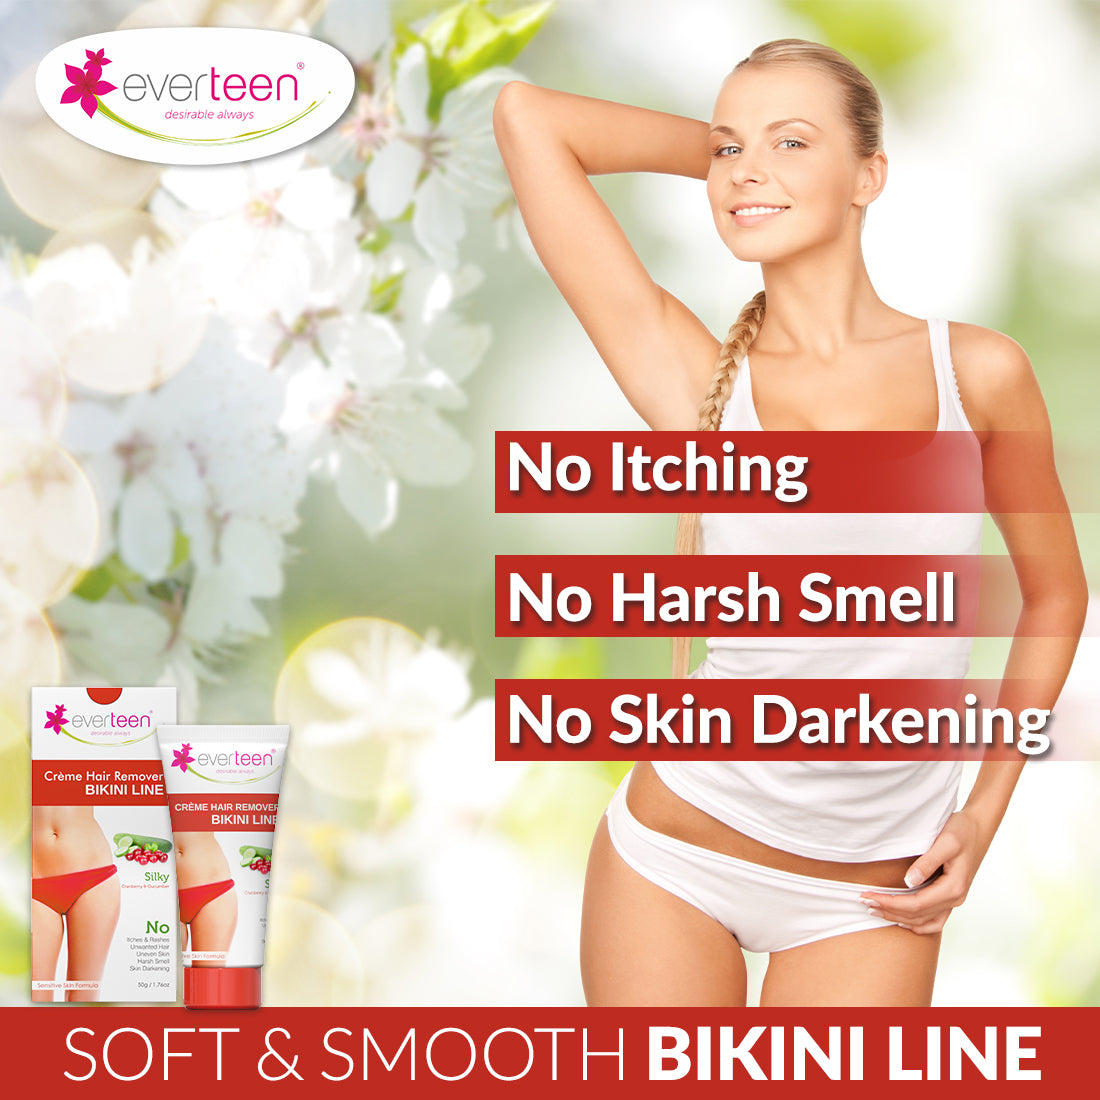 everteen Value Combo - Bikini Line Hair Removal Creme SILKY and Foam Intimate Wash 150ml for Women - everteen